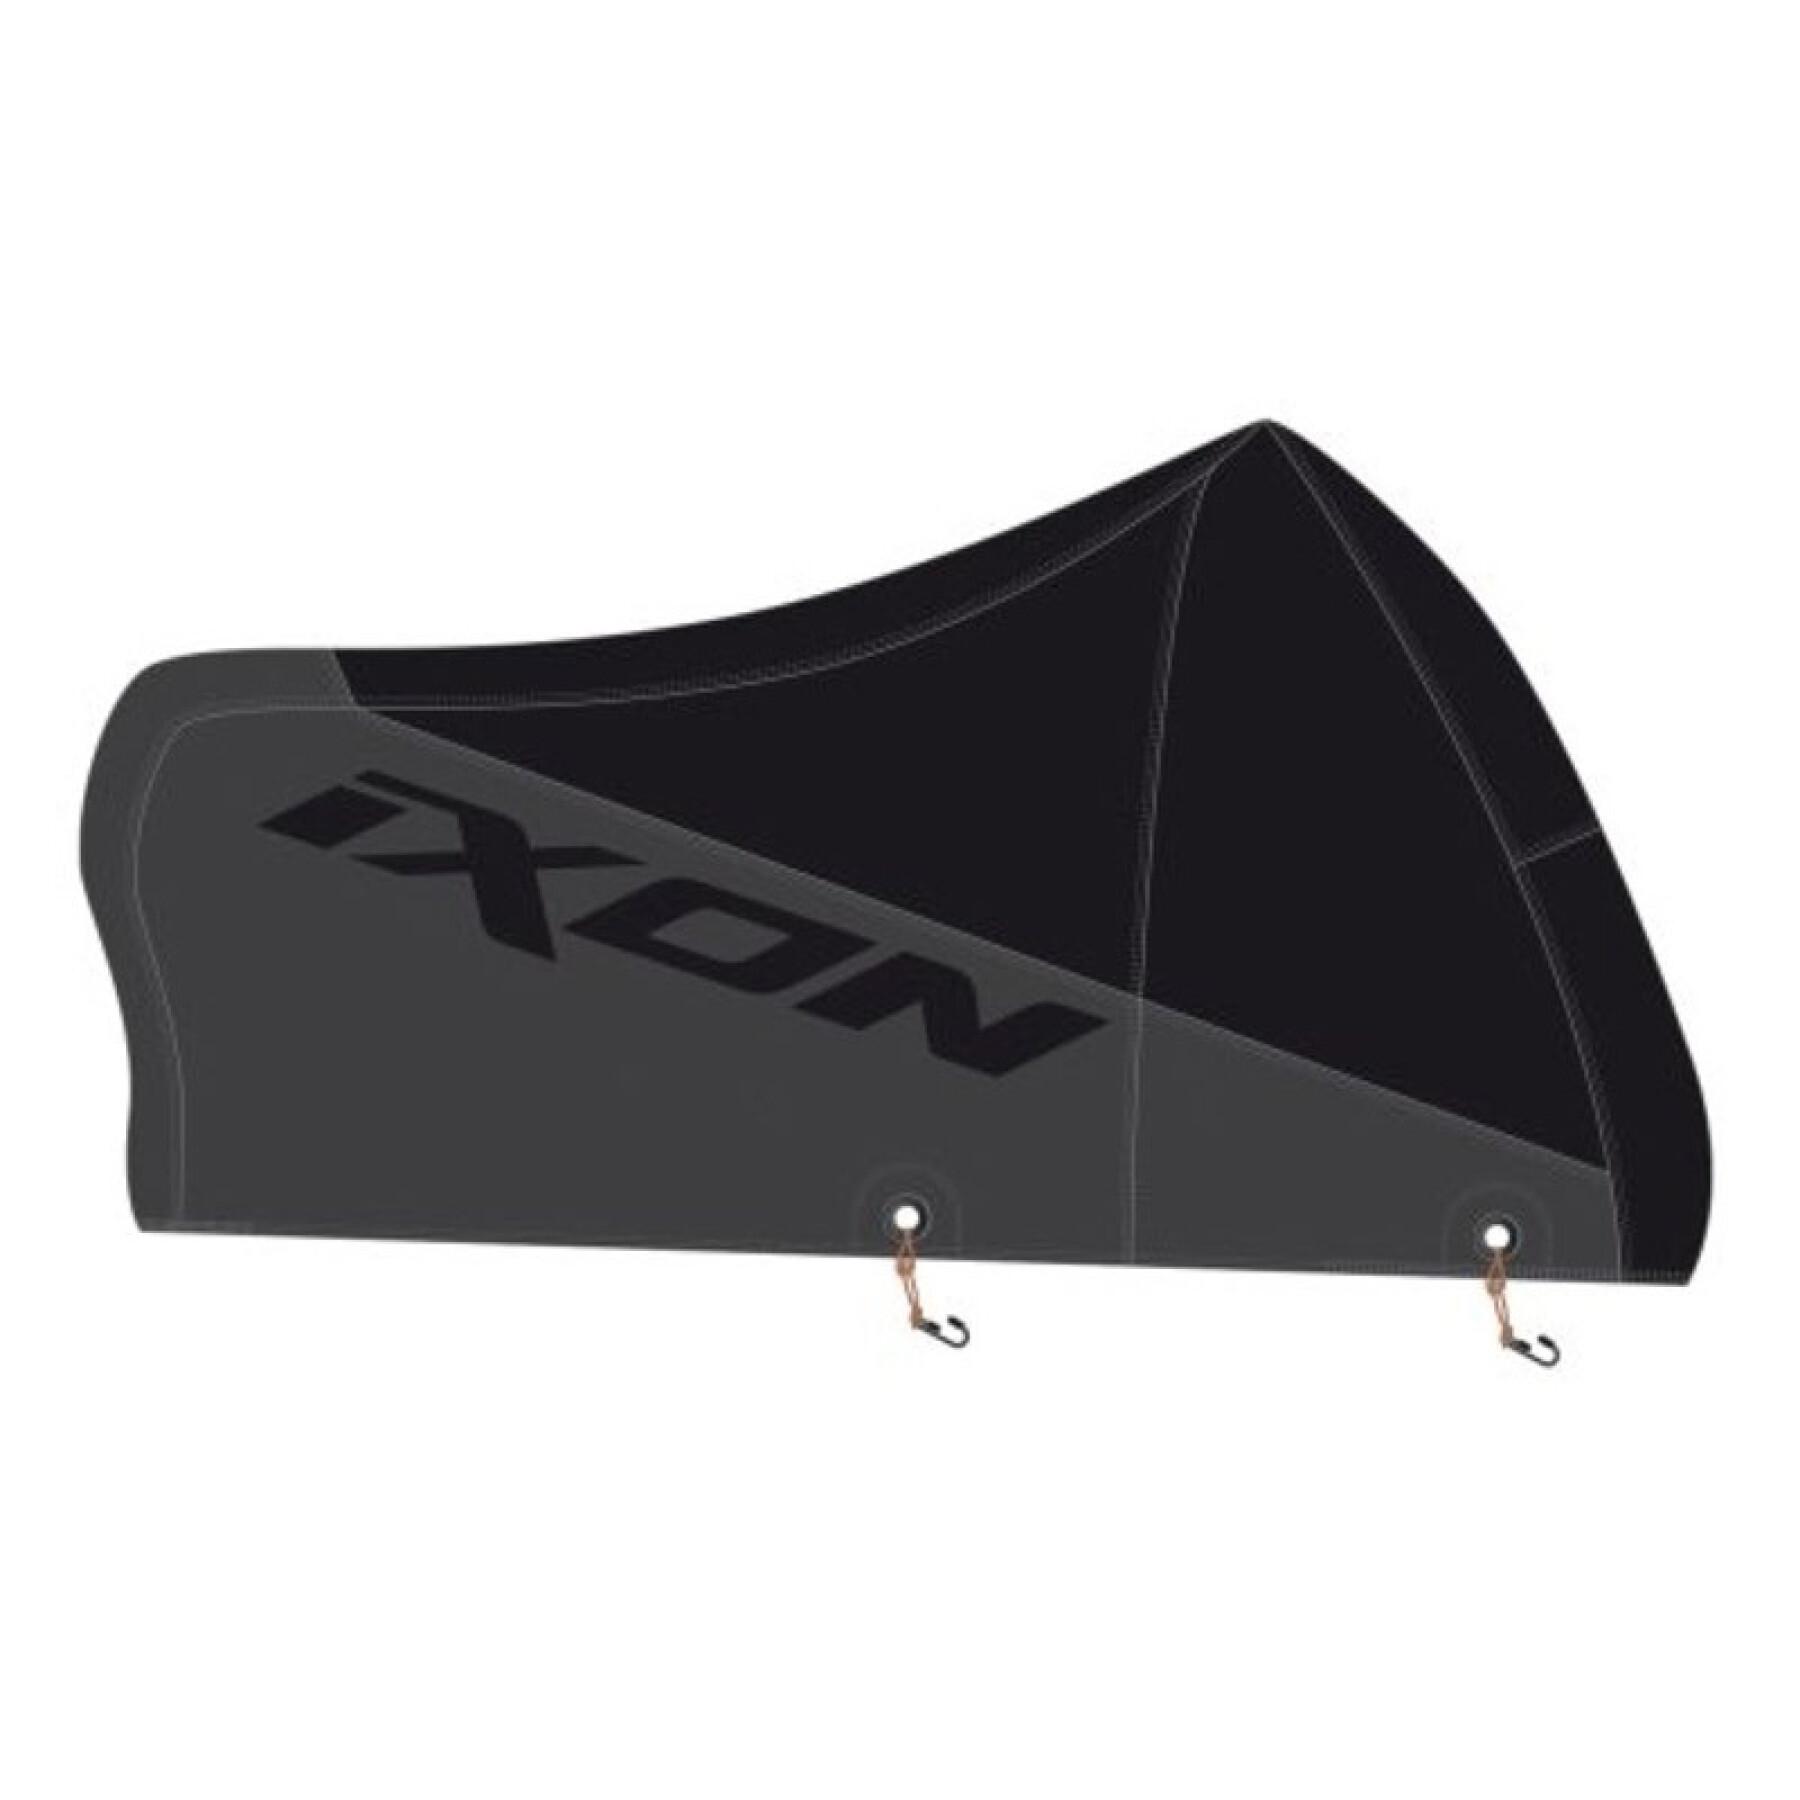 Motorcycle cover for 750/1200cc roadster Ixon Blanky